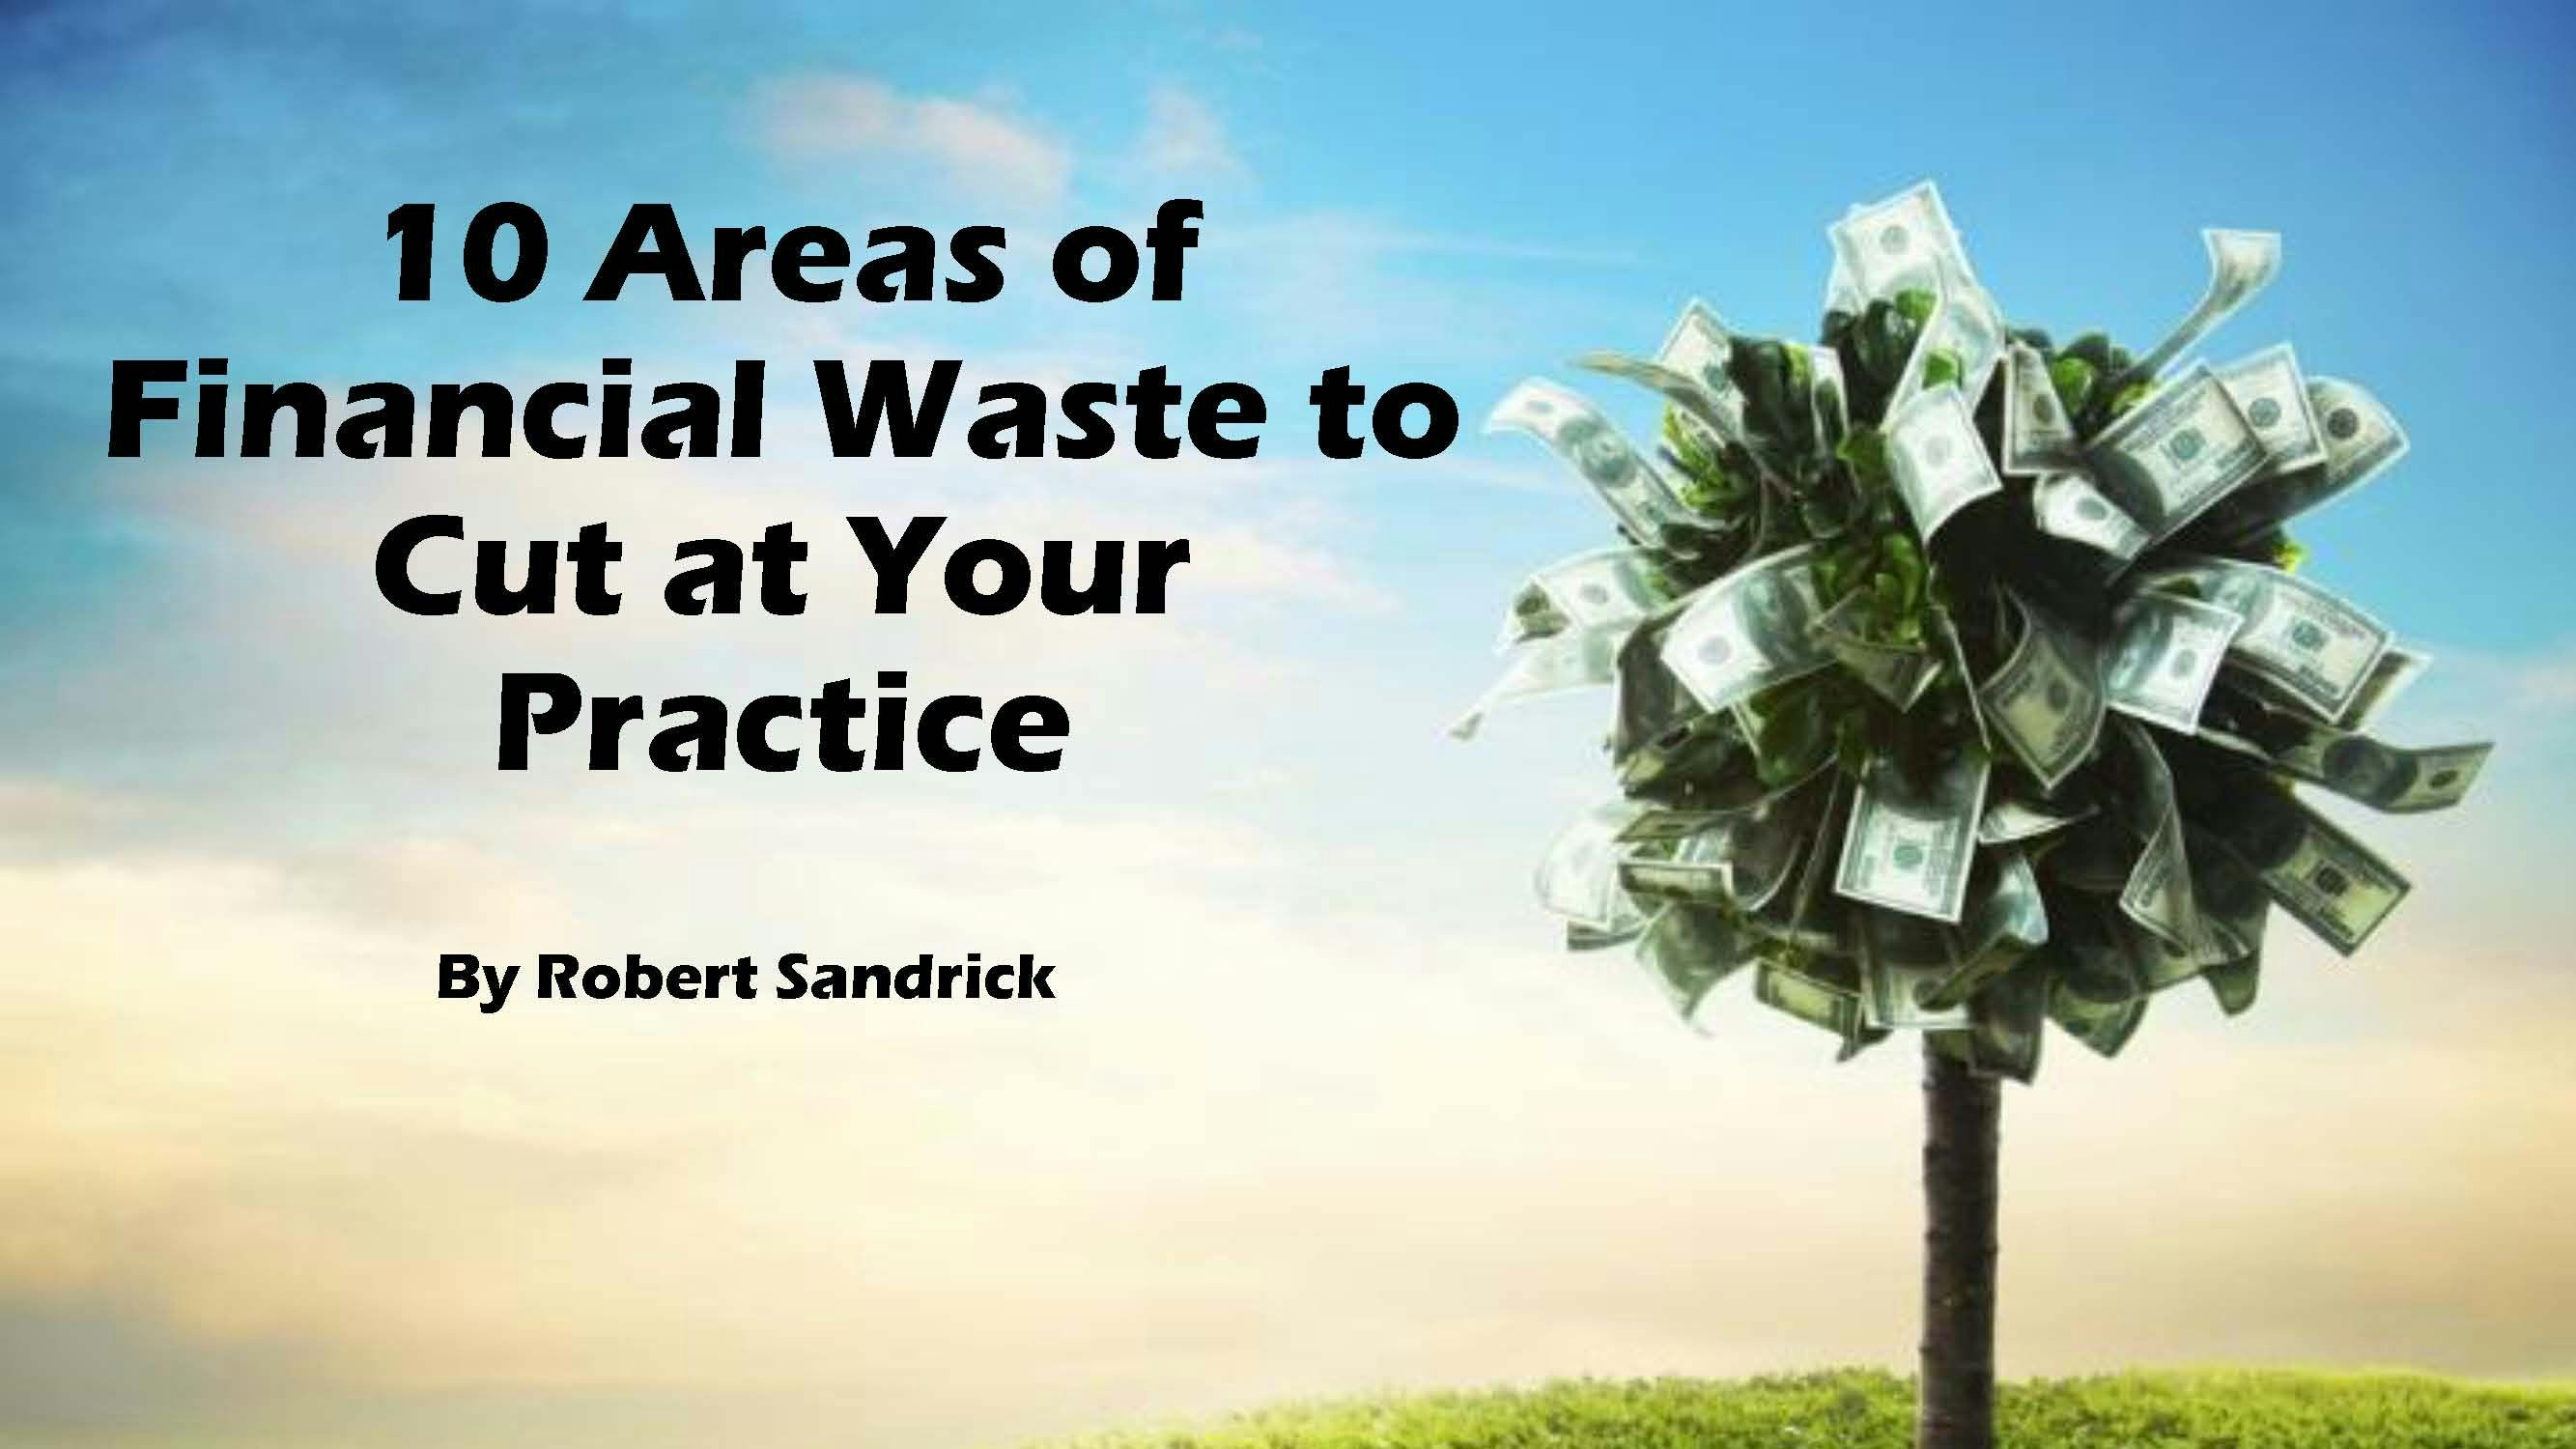 10 Areas of Financial Waste to Cut at Your Practice